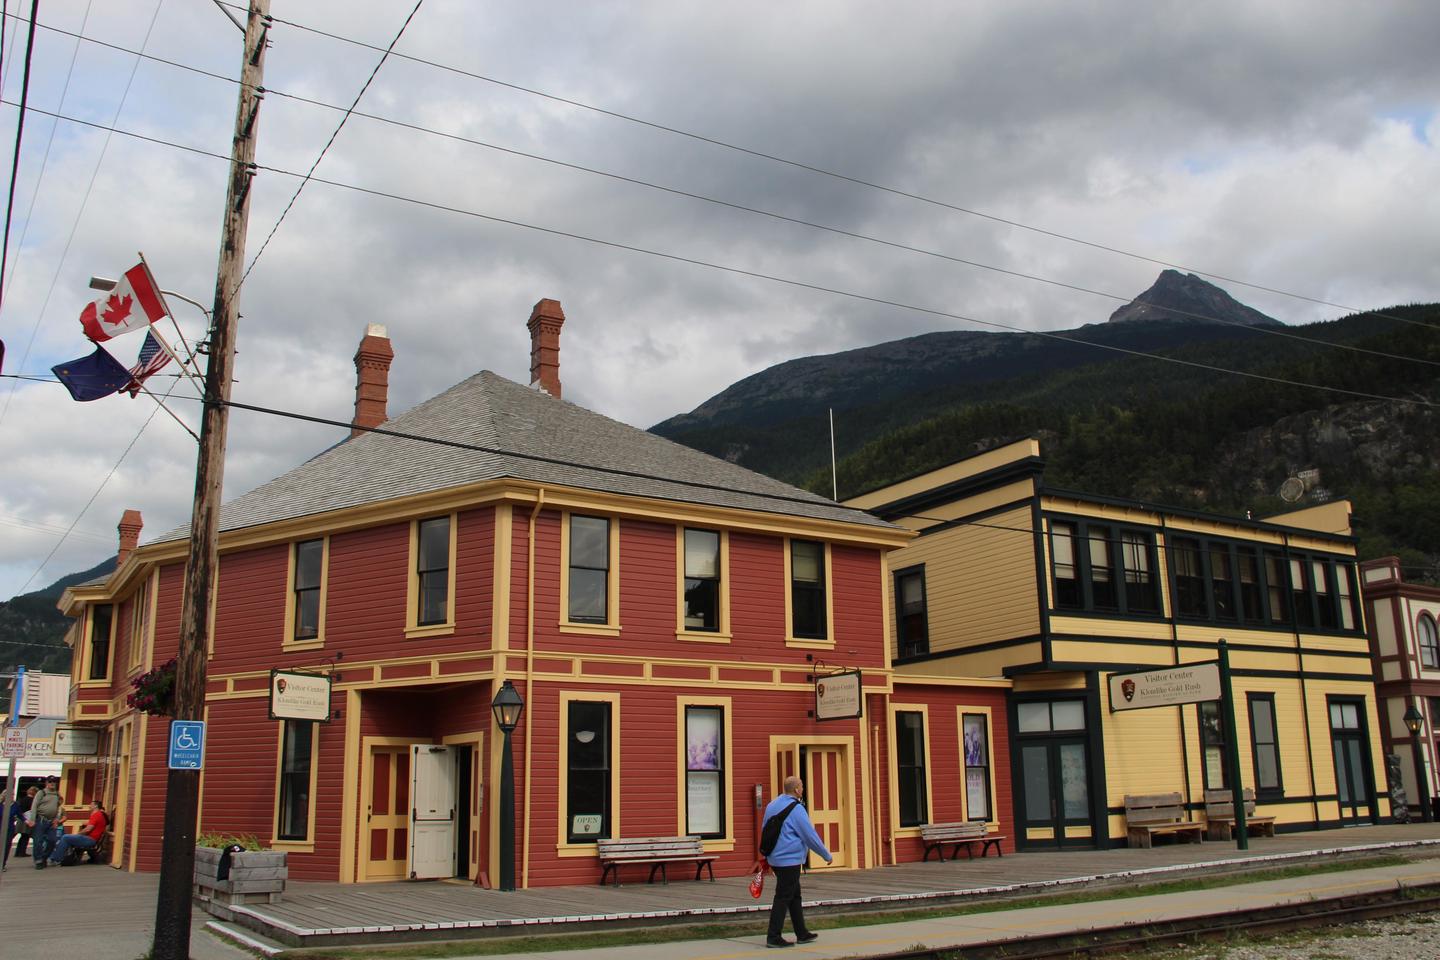 Klondike Gold Rush National Historical Park Visitor CenterThe park's visitor center is located at 2nd and Broadway right by the railroad tracks.